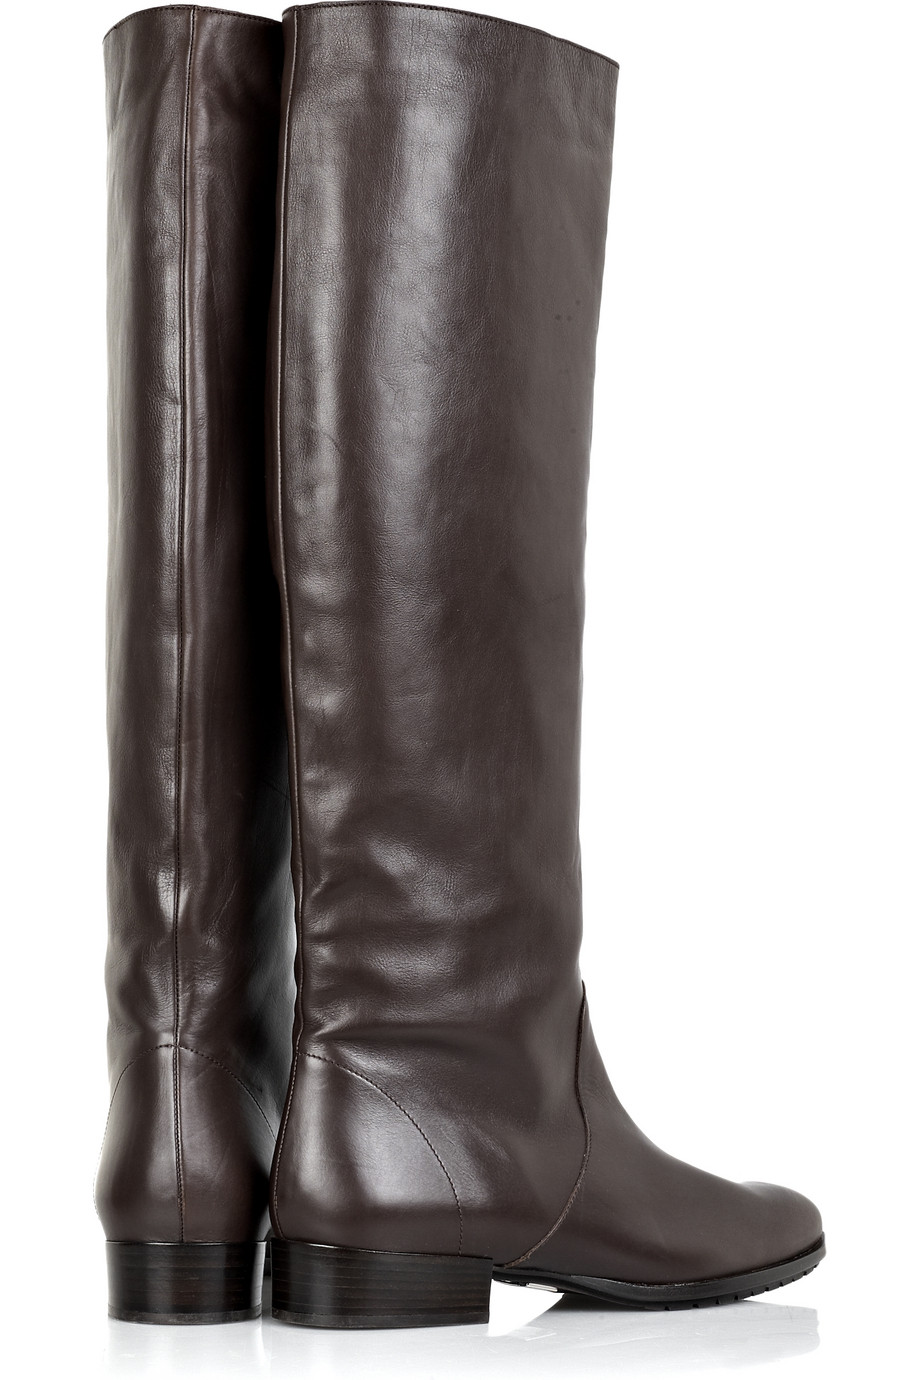 Michael Kors Flat Leather Knee-High Boots In Brown  Lyst-5985